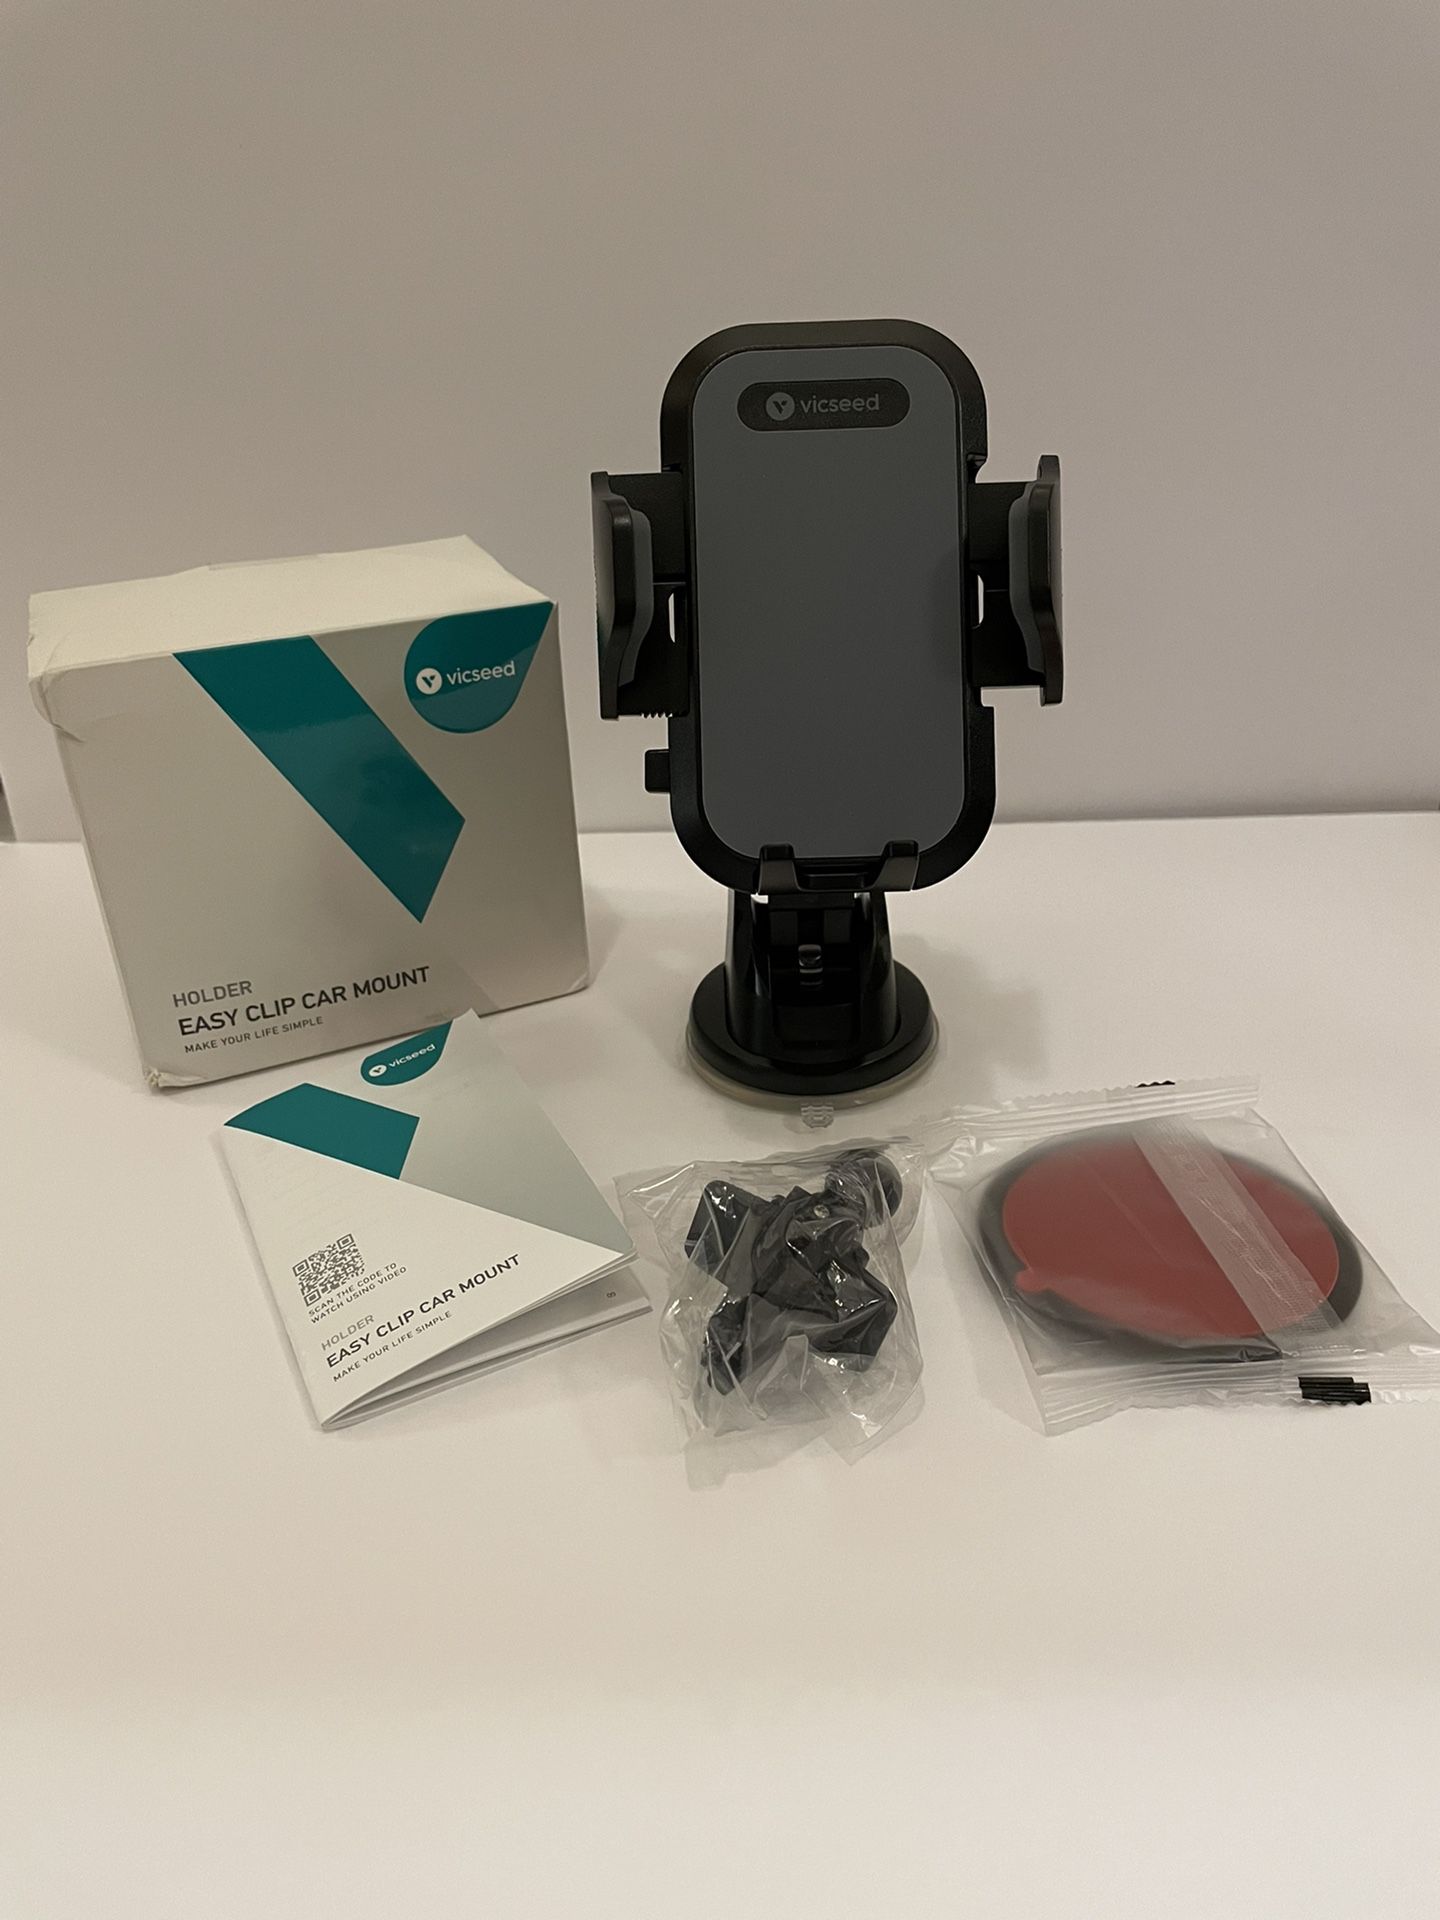 Vicseed Easy Clip Car Mount Holder - New in Box